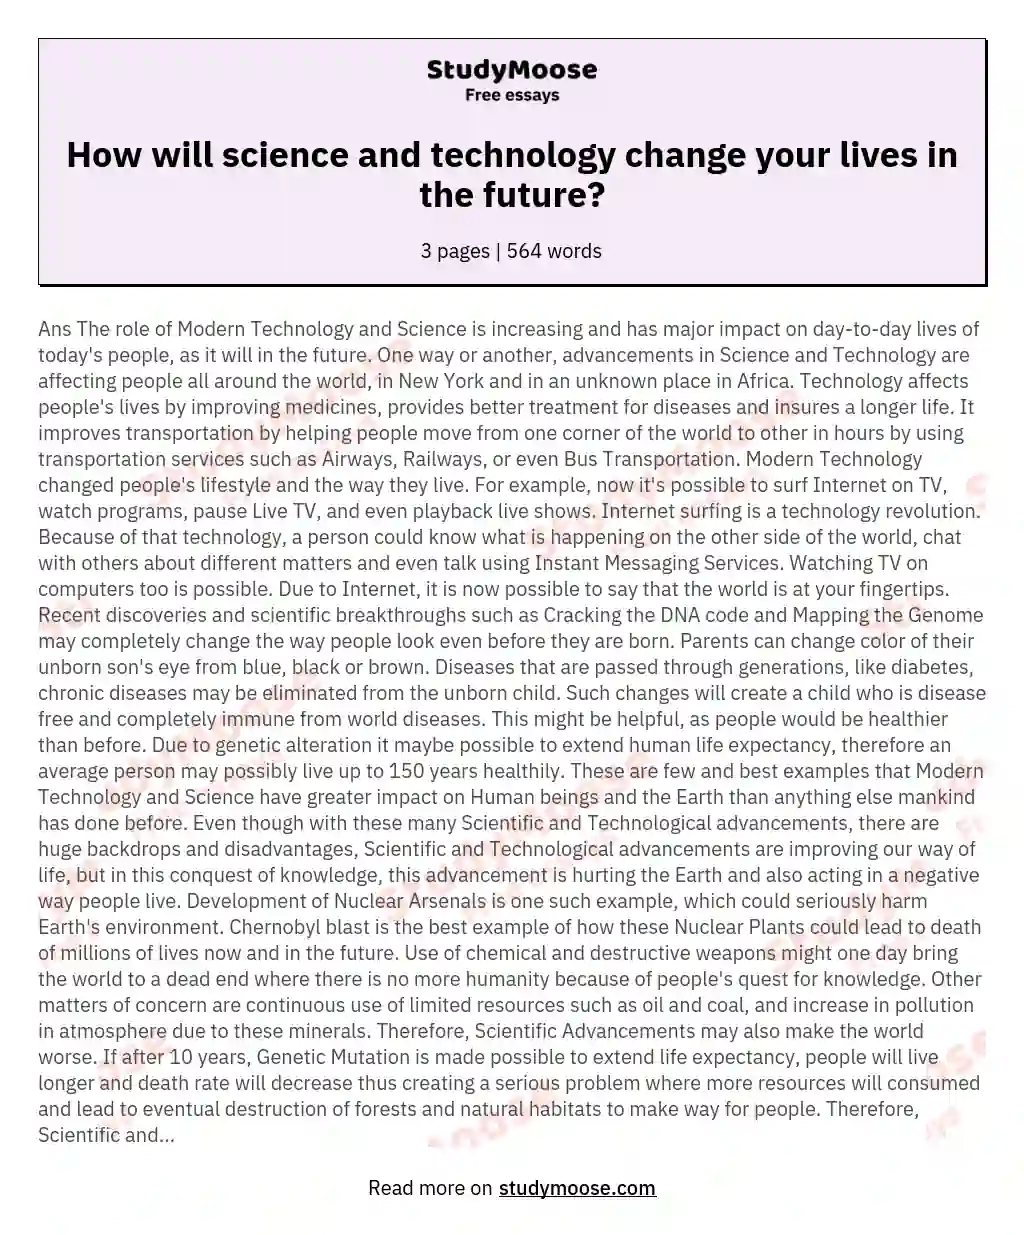 How will science and technology change your lives in the future?